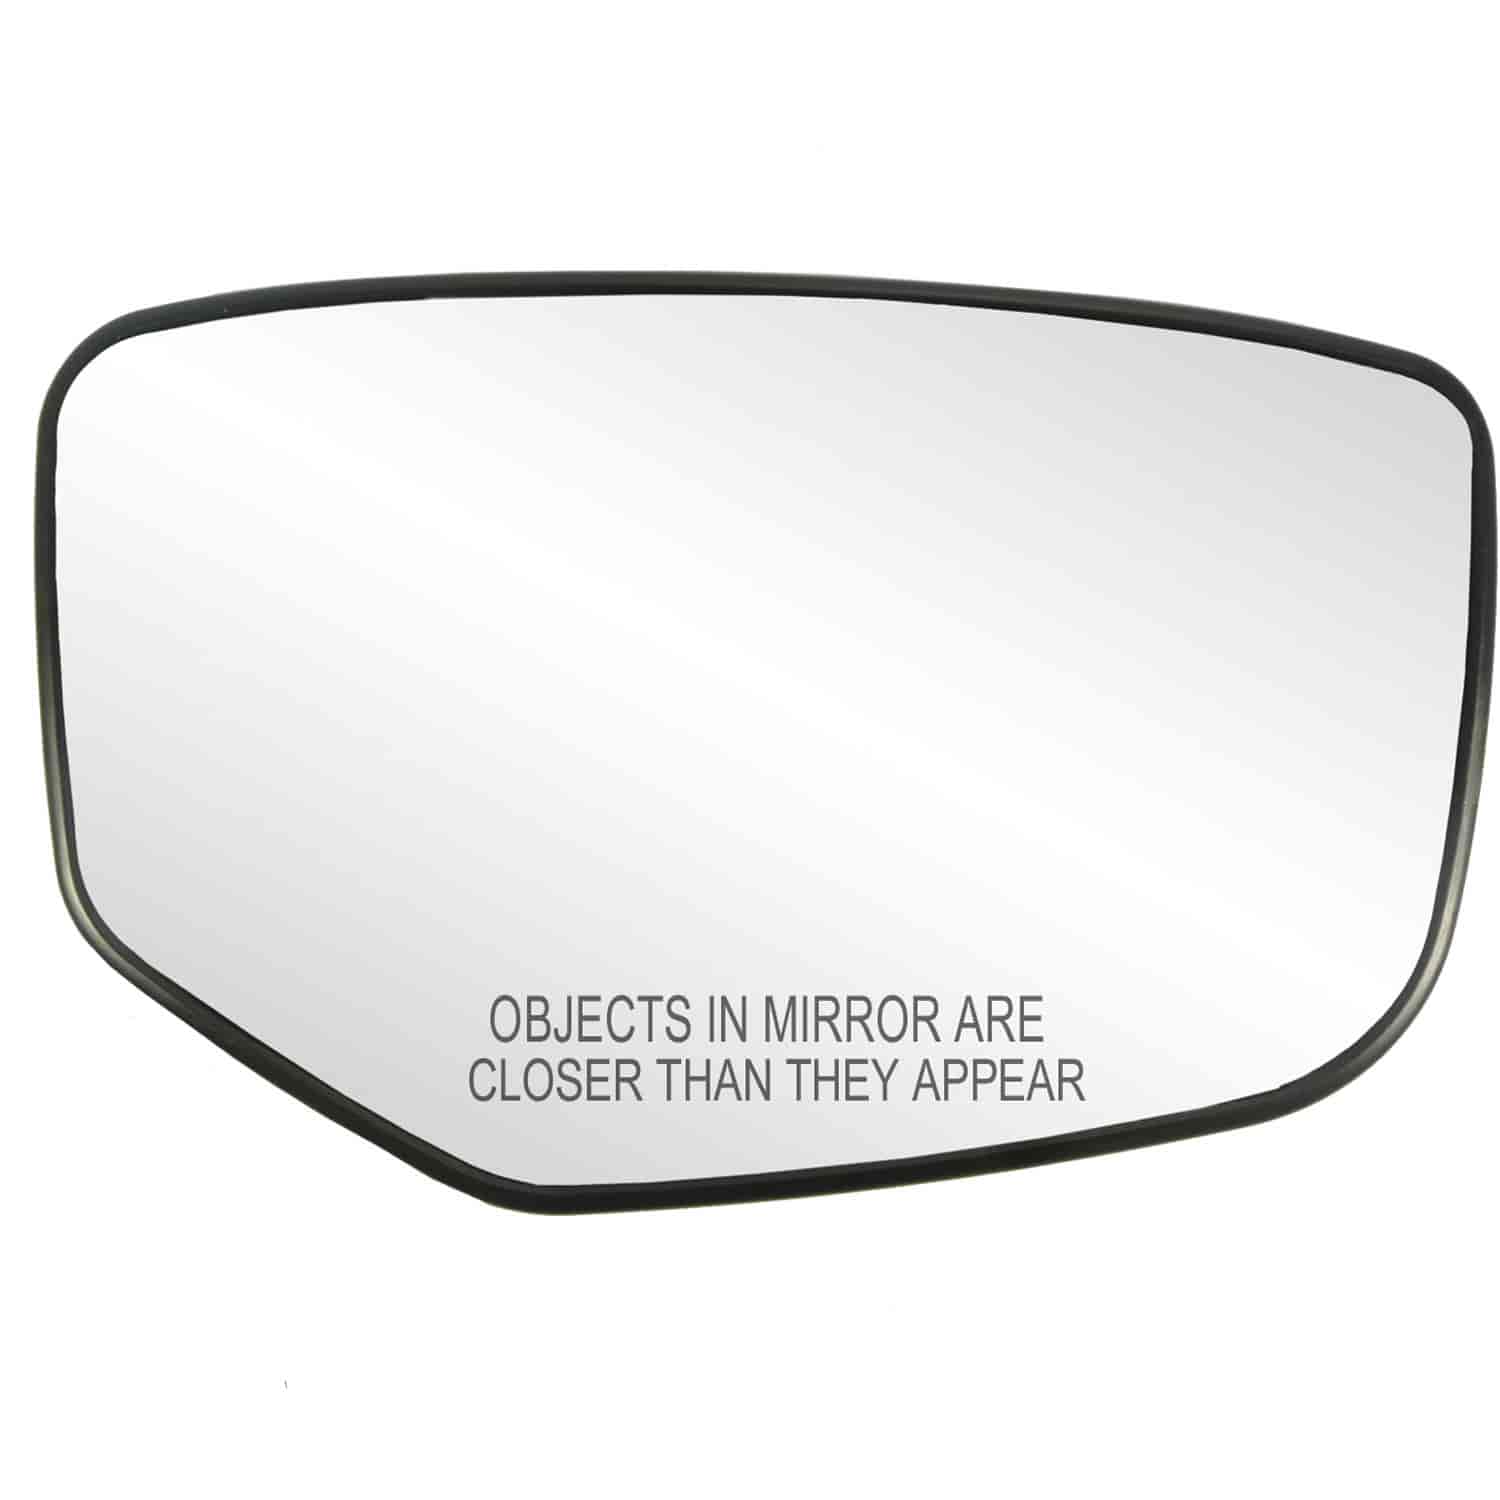 Replacement Glass Assembly for 08-12 Accord replace your cracked or broken passenger side mirror gla